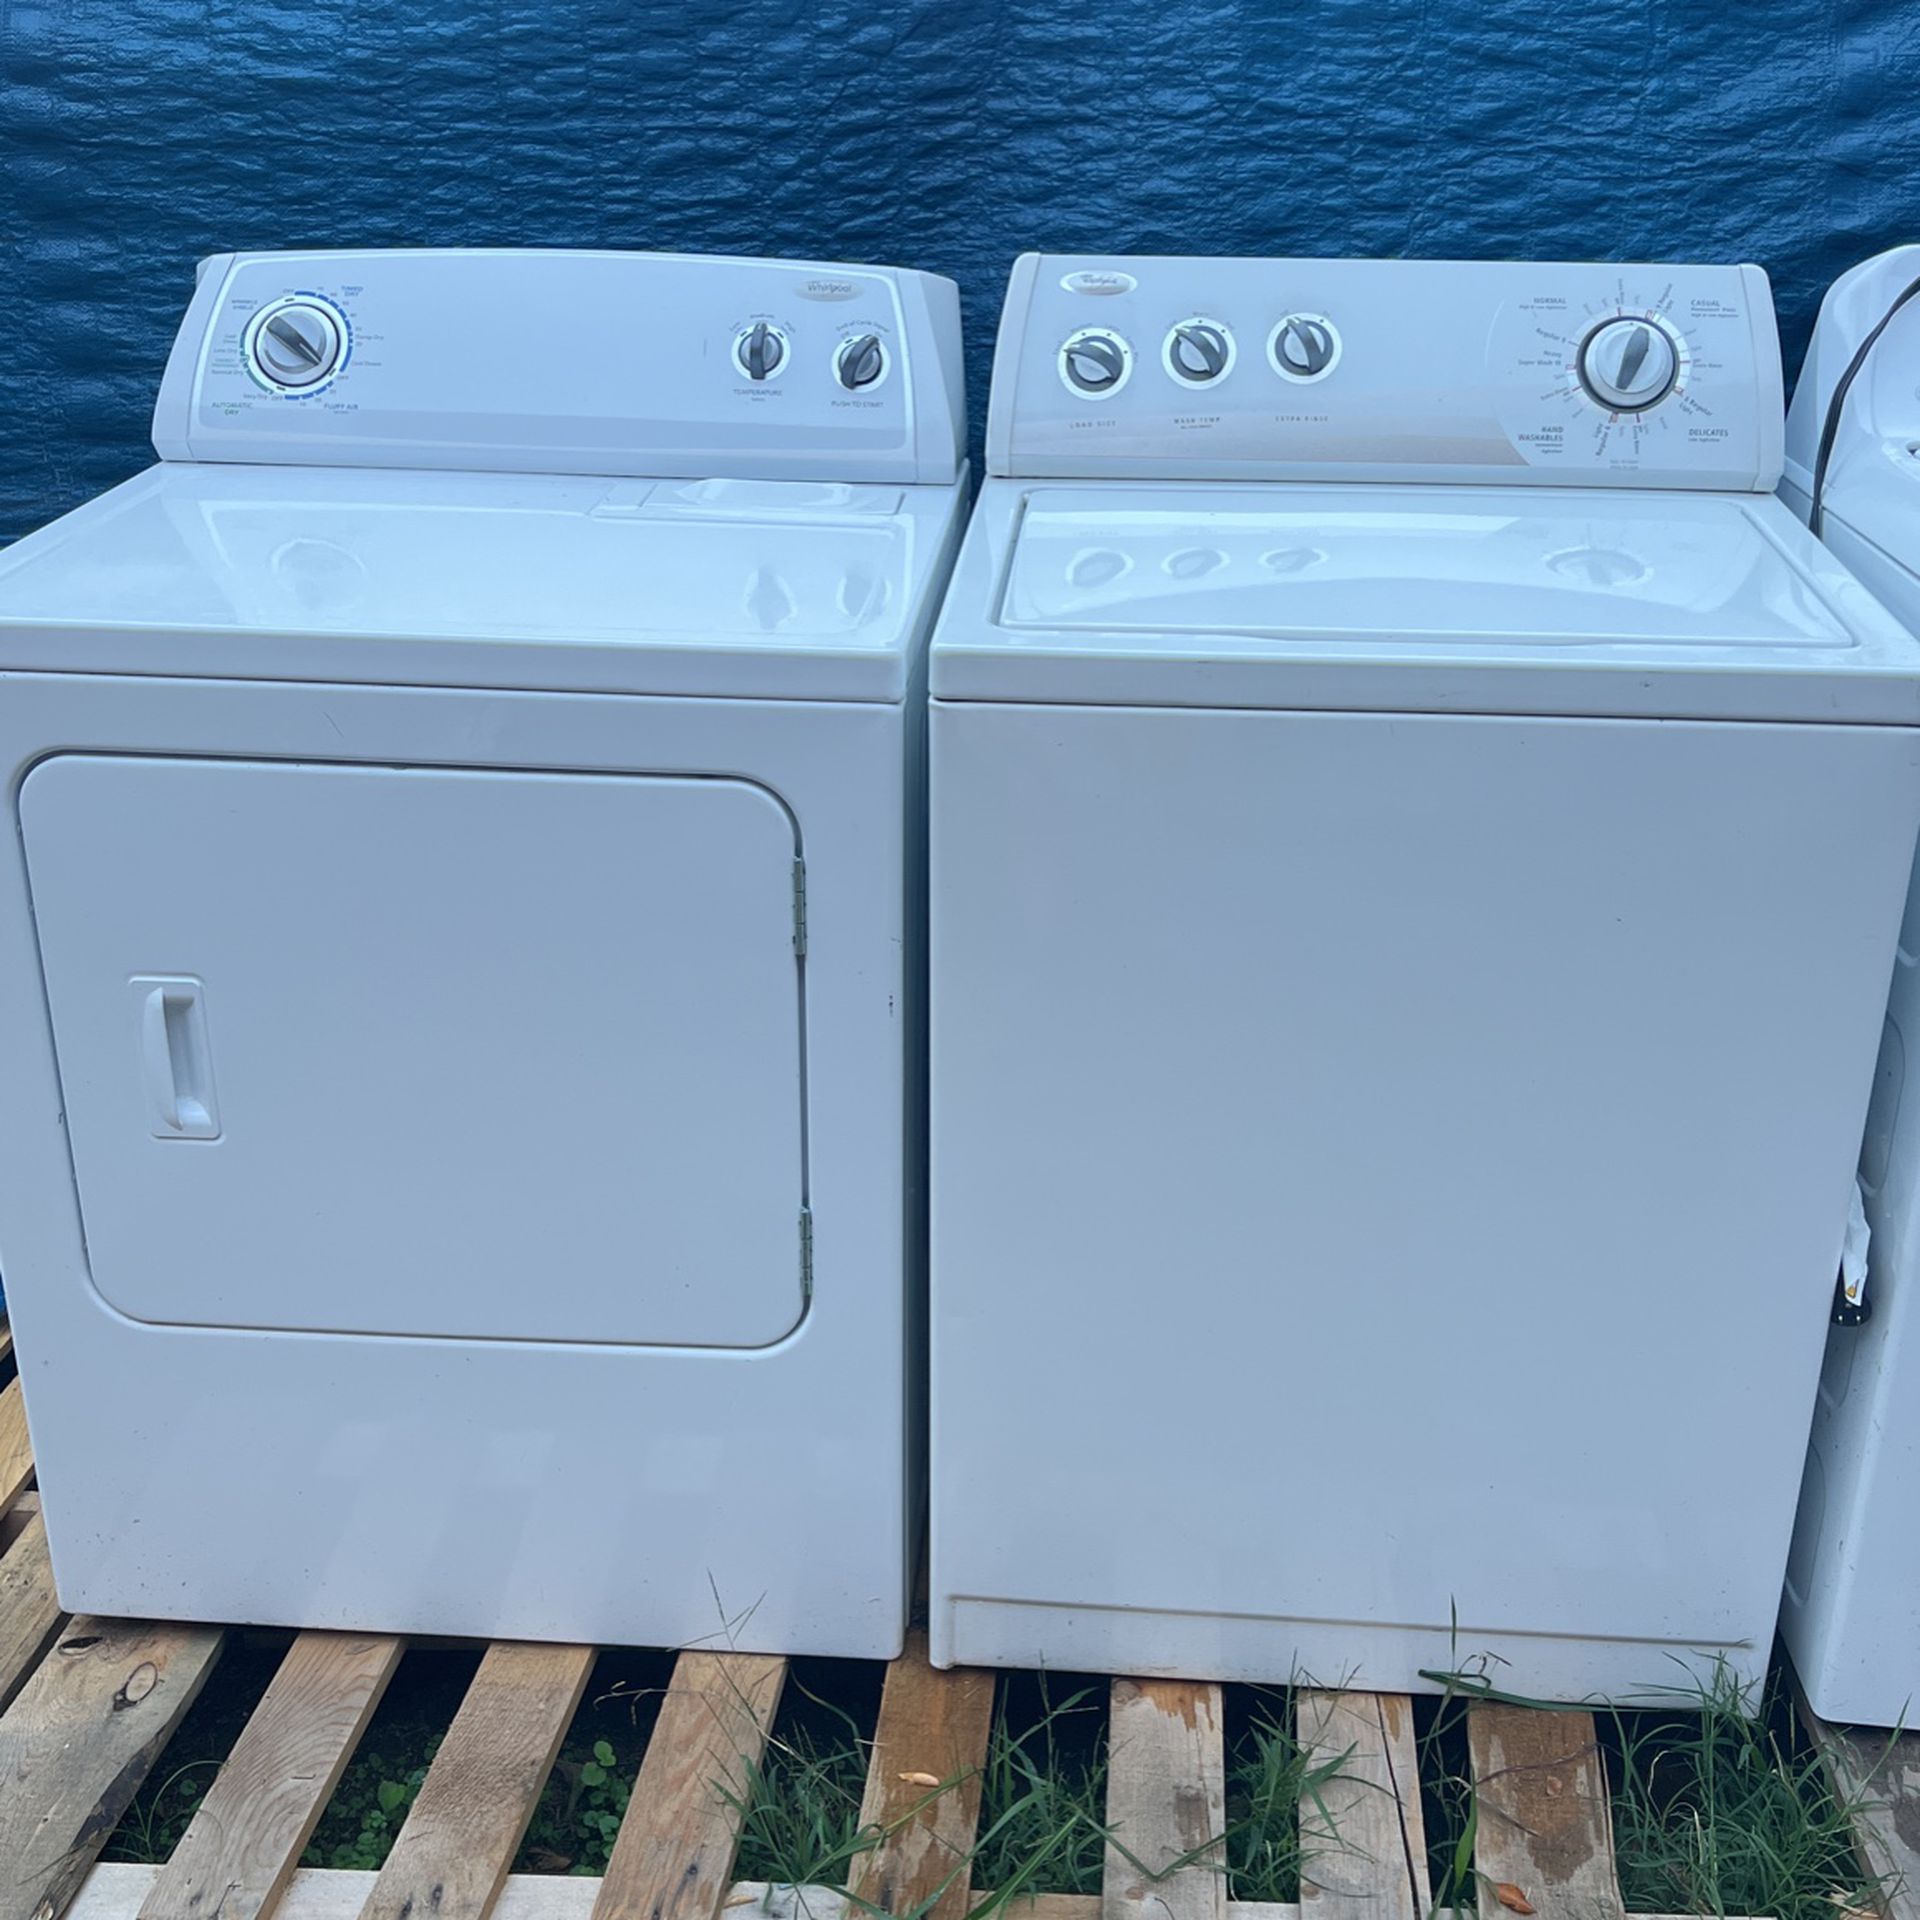 Washer And Dryer Whirlpool Combo